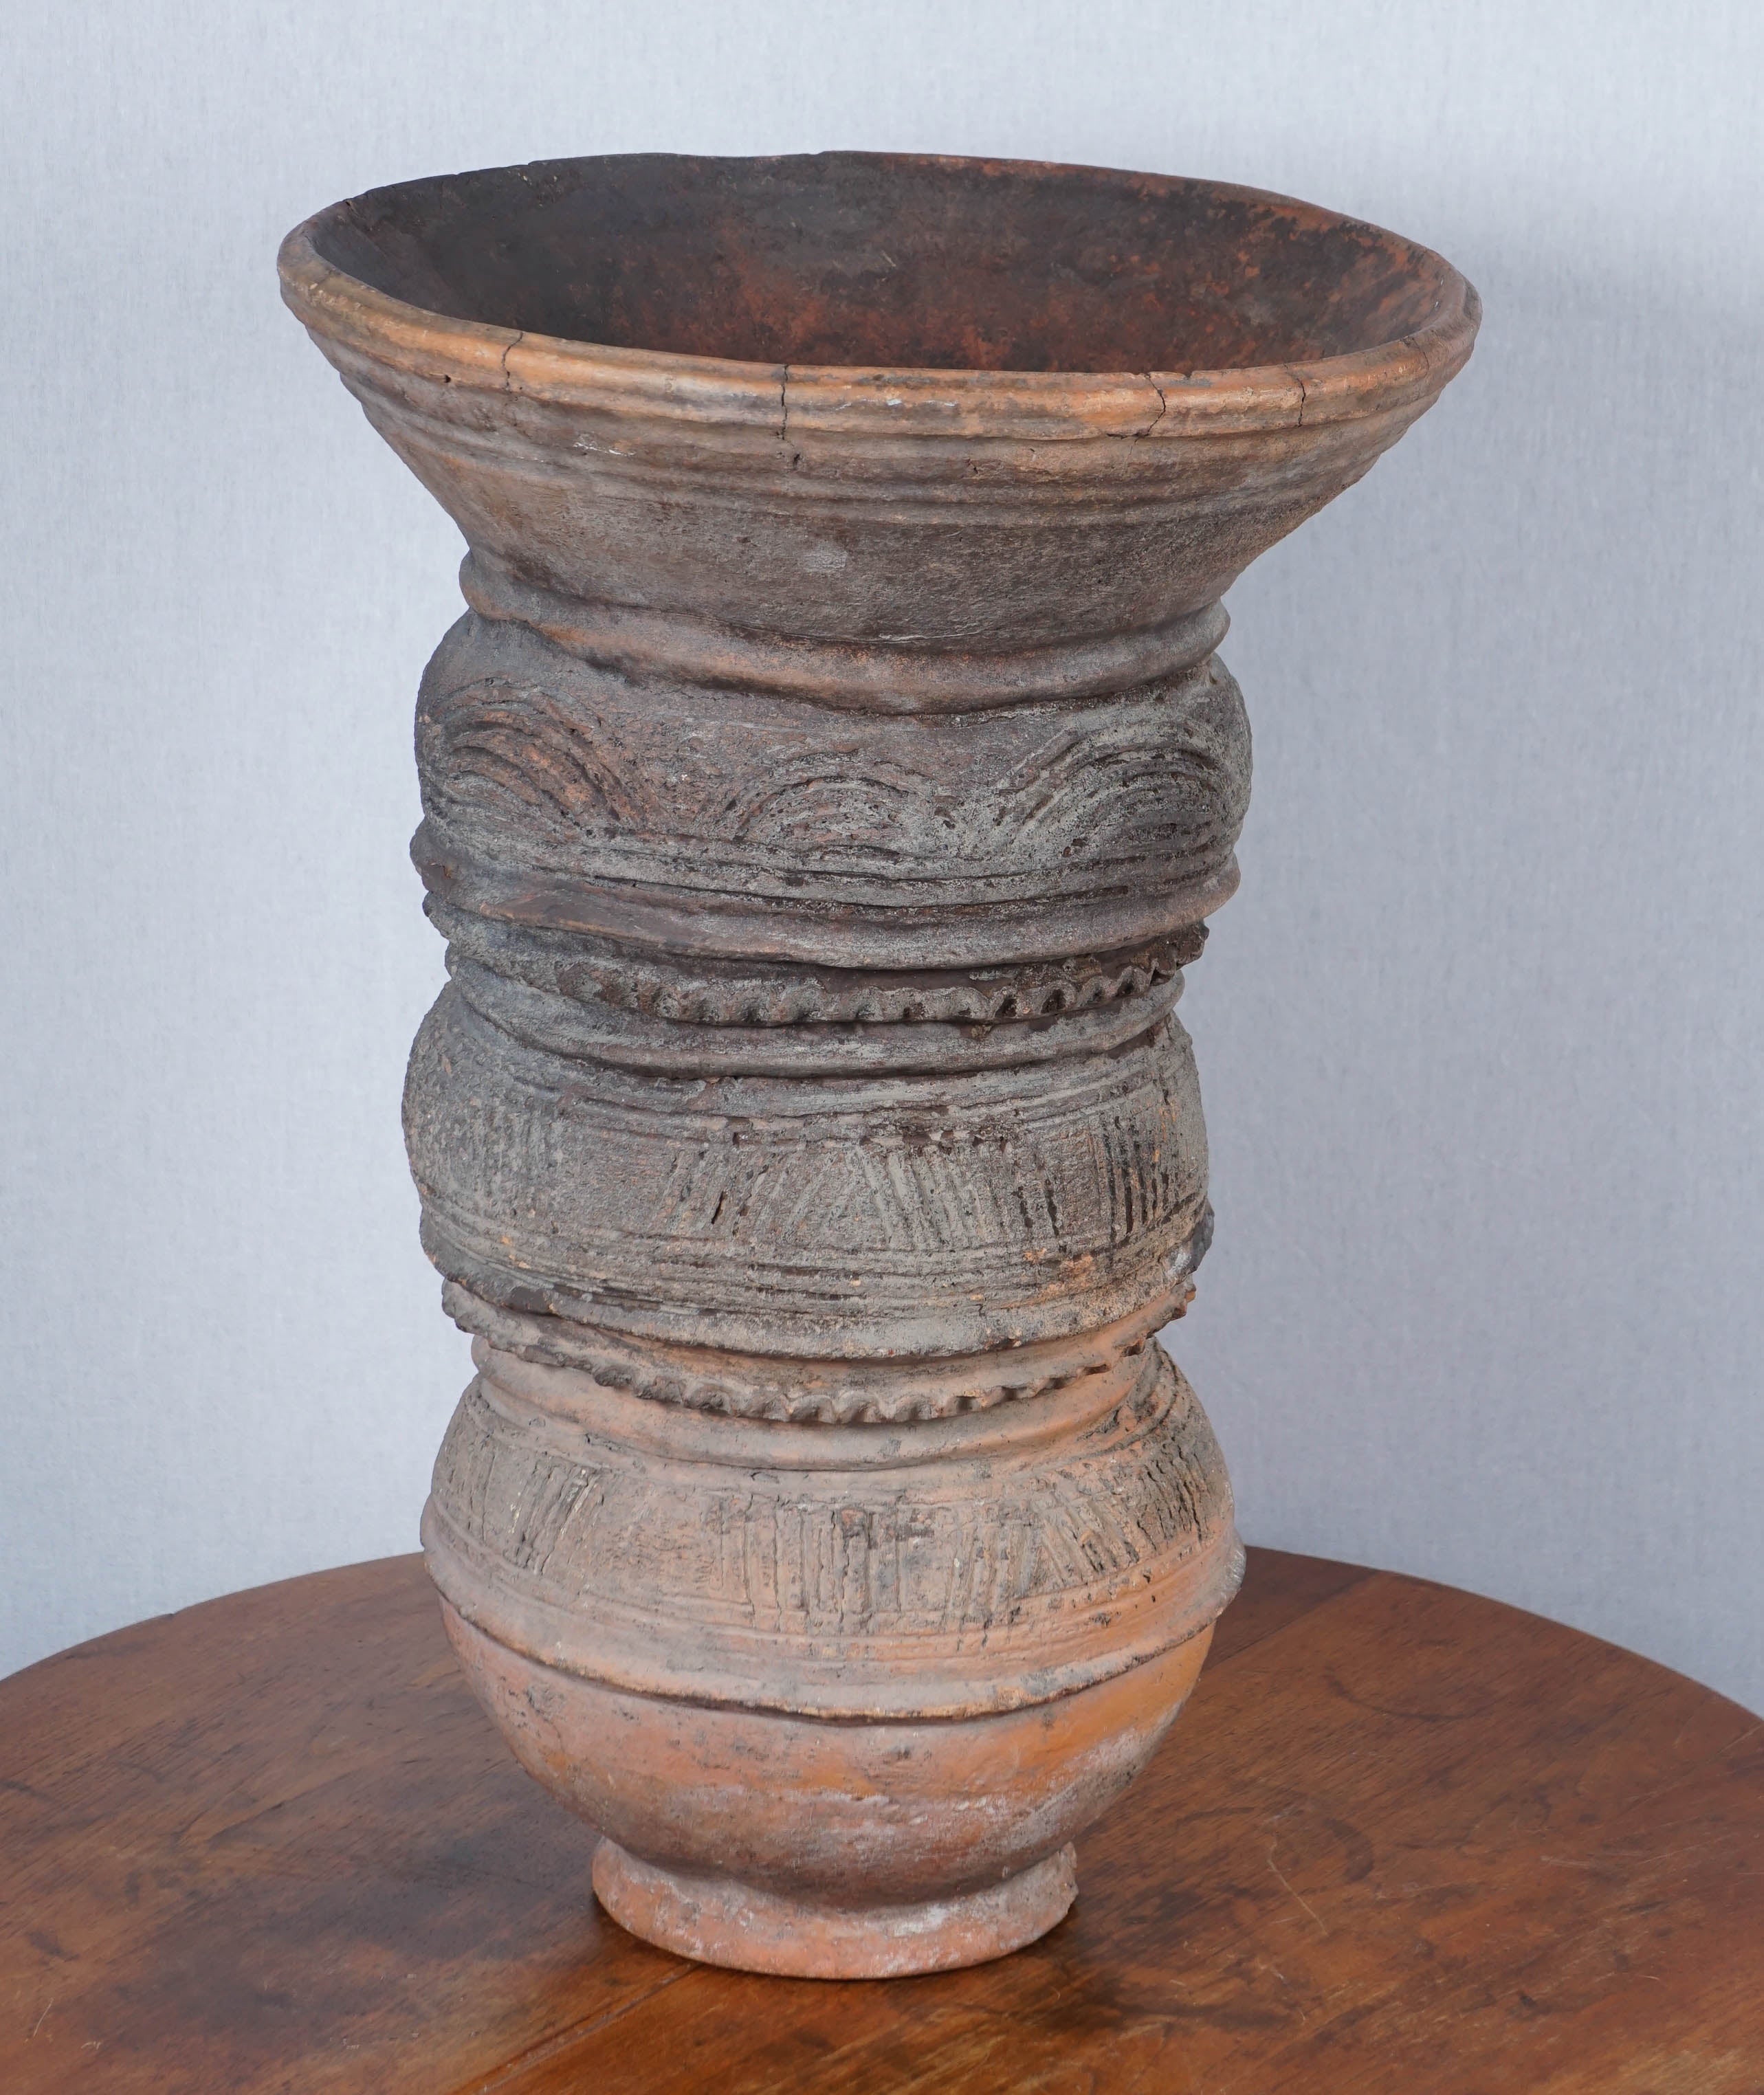 Nupe Terra Cotta Water Vessel Stand